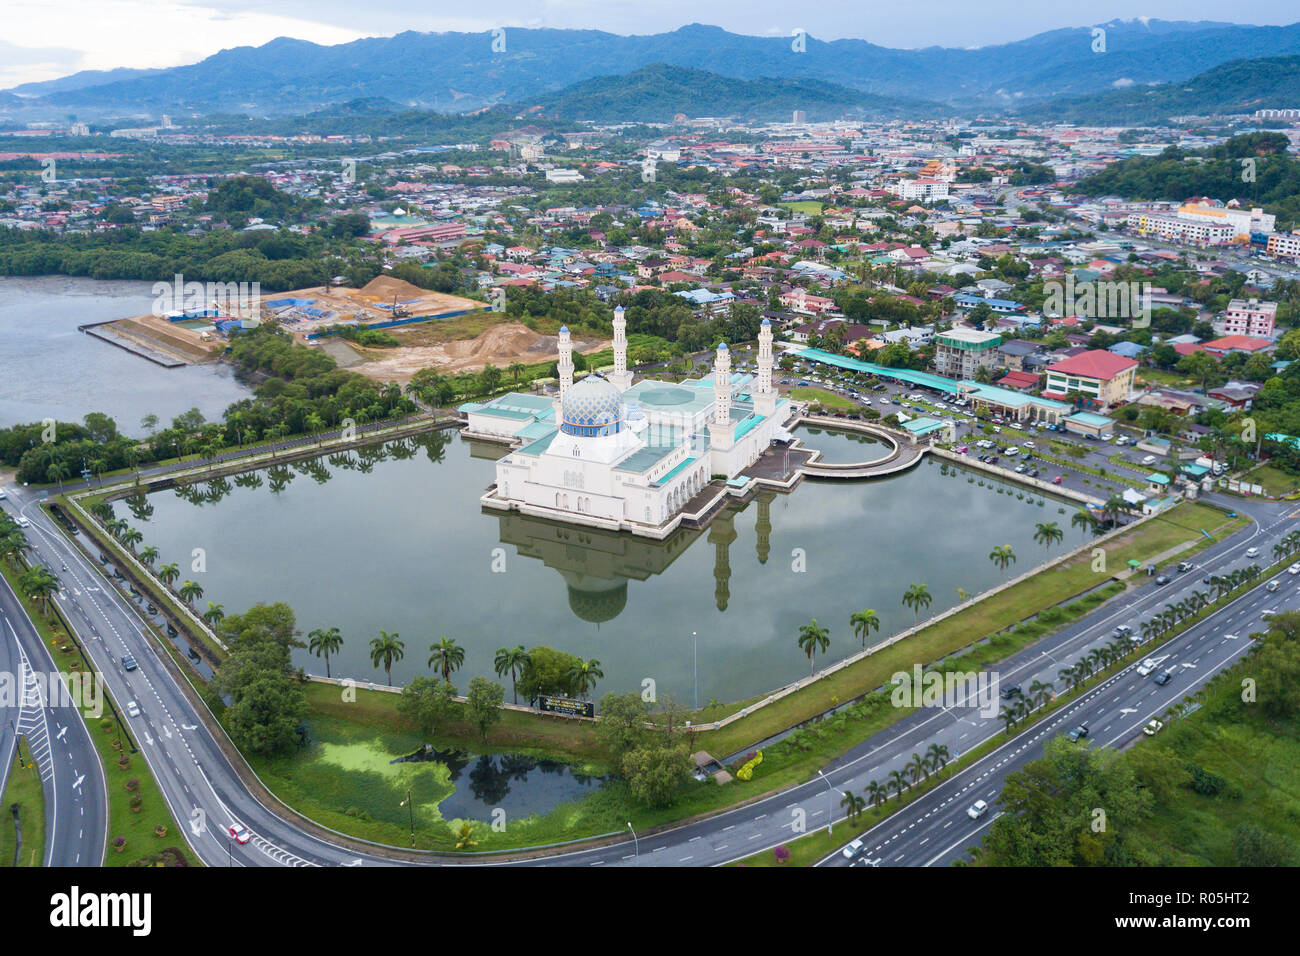 An aerial view of Kota Kinabalu City Mosque  and its surrounding. Stock Photo